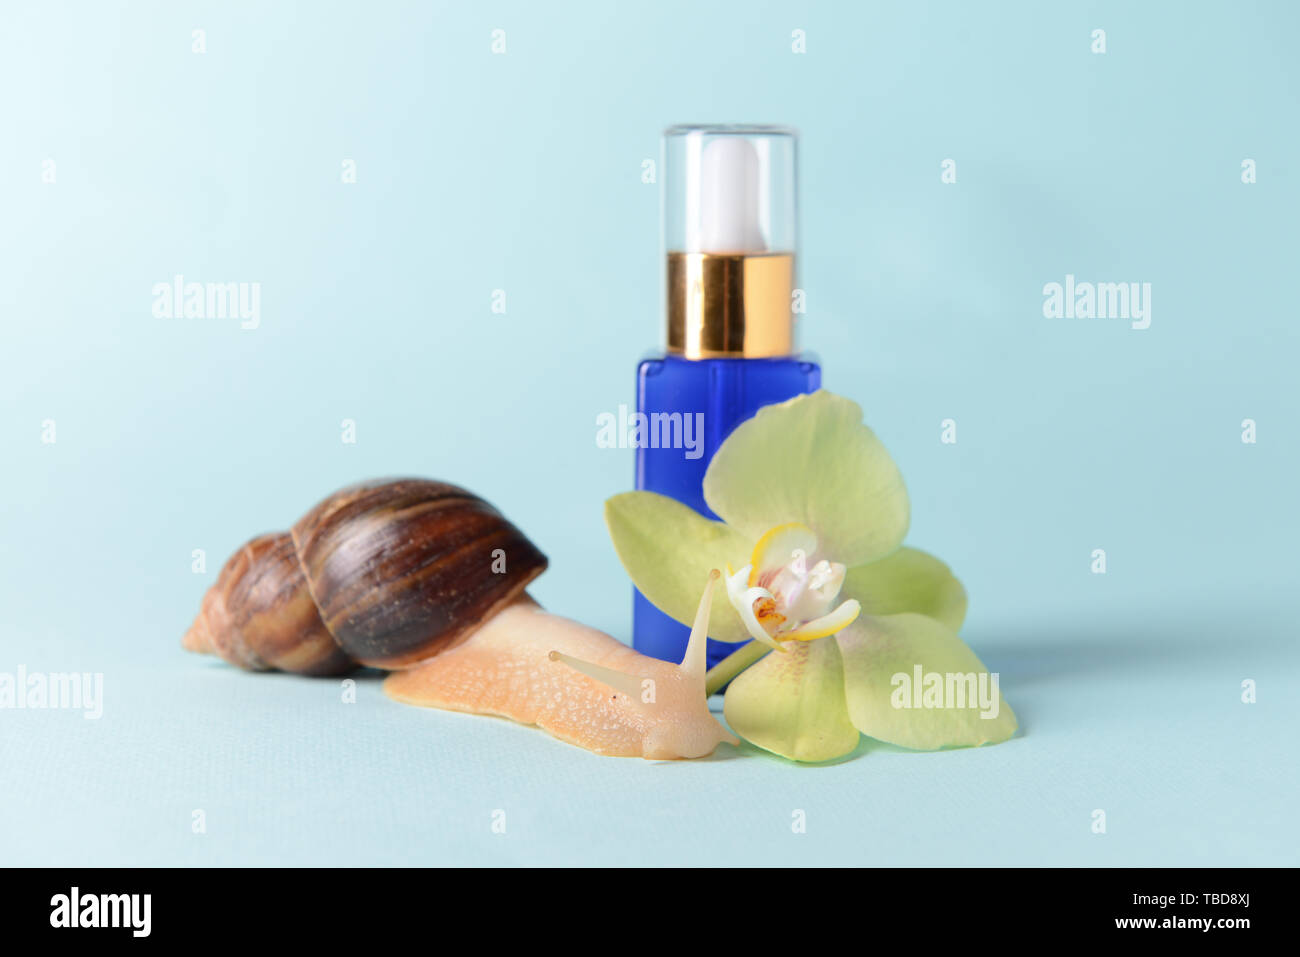 Giant Achatina snail and cosmetics on color background Stock Photo